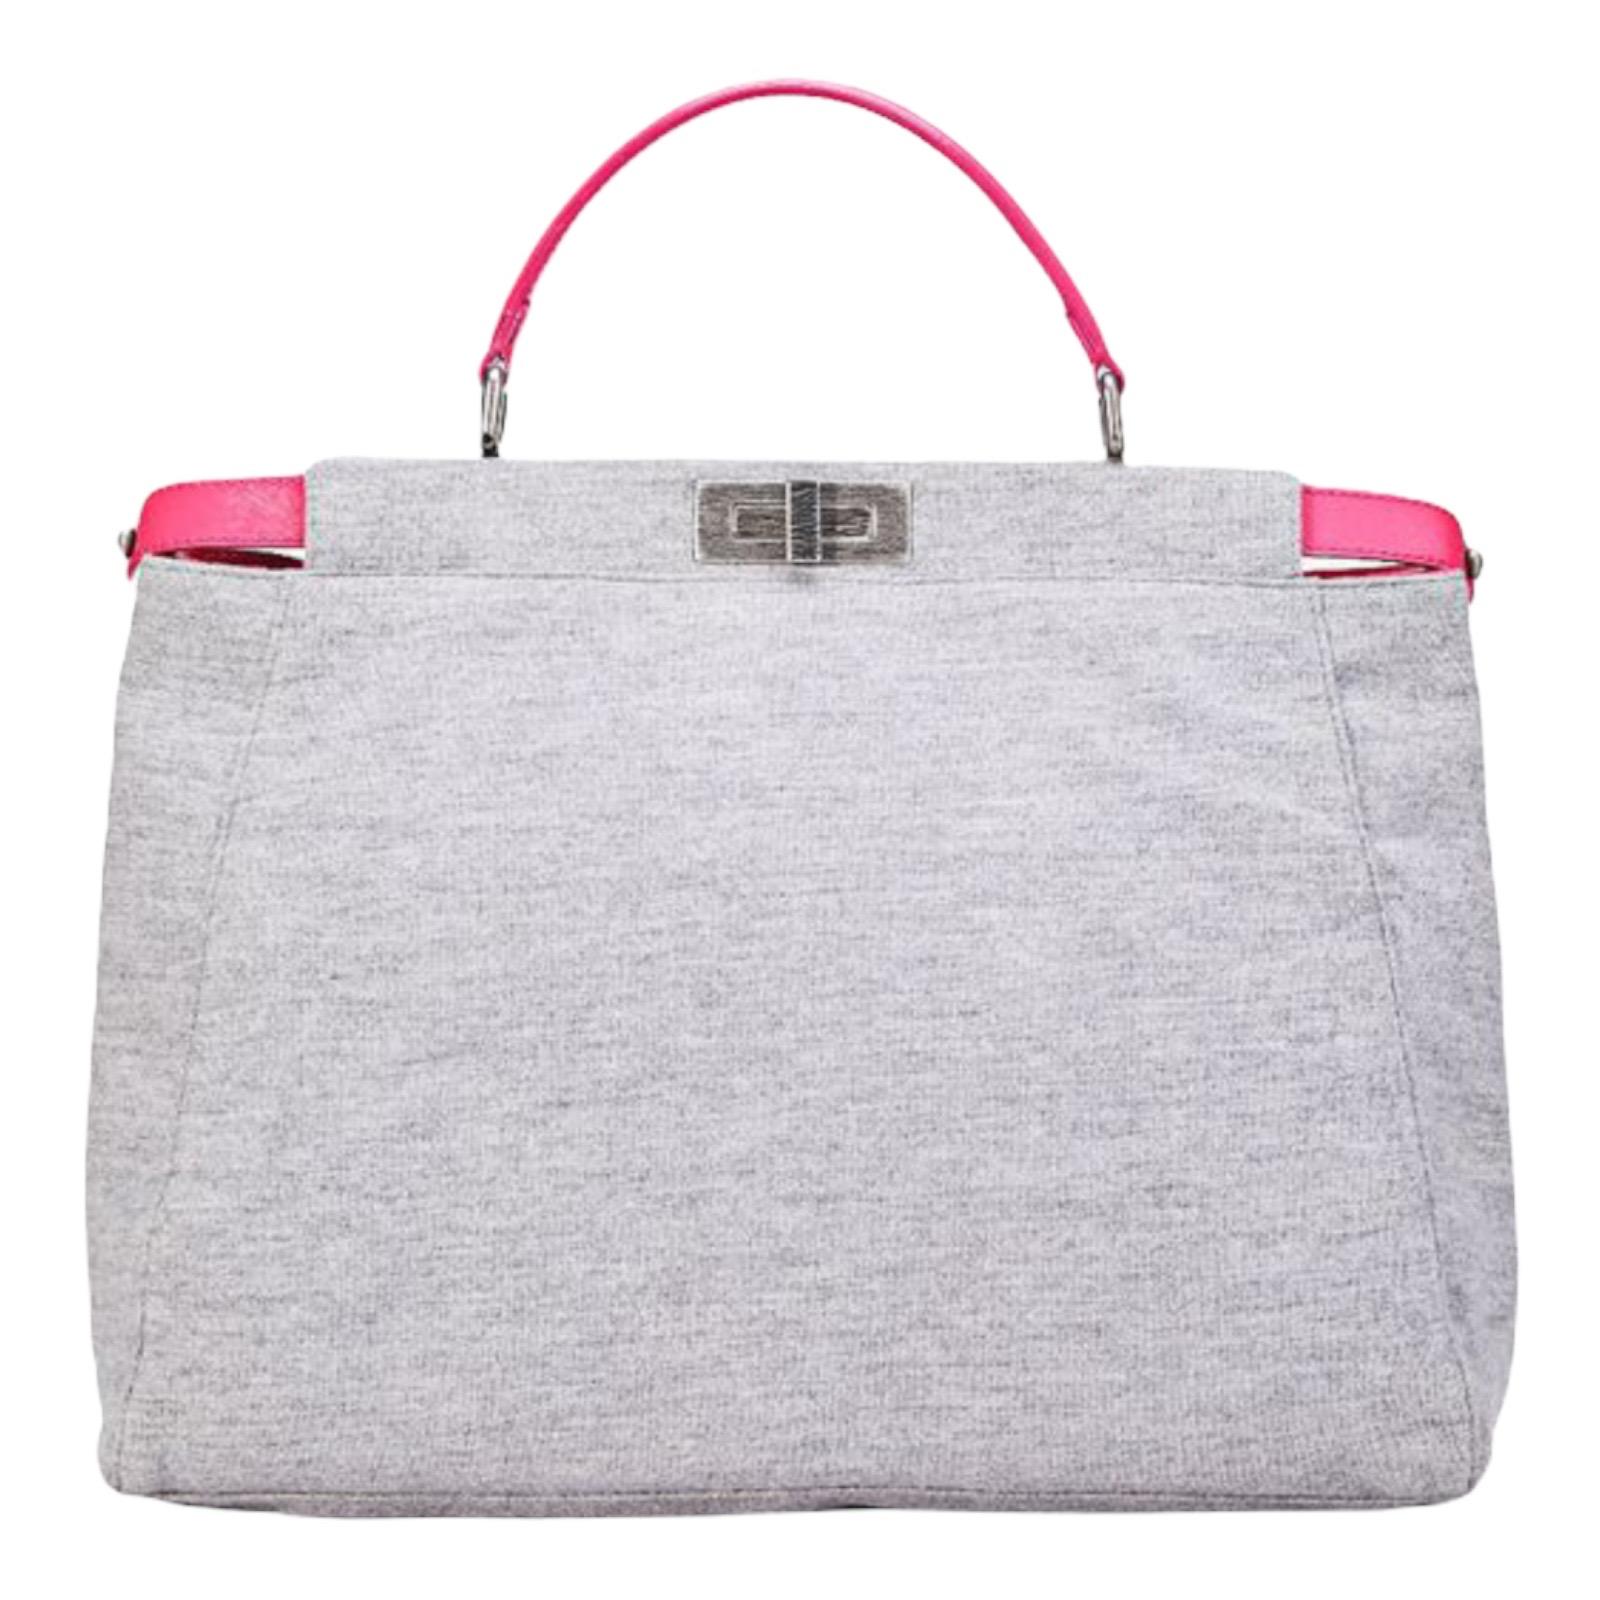 Rare FENDI Peekaboo shoulder bag in a very limited edition - only 3 pieces per country.

Details:

• Light grey fabric with hot pink leather lining
• Brushed silver-tone hardware
• Top handle with rings
• Adjustable, removable shoulder strap

• 2